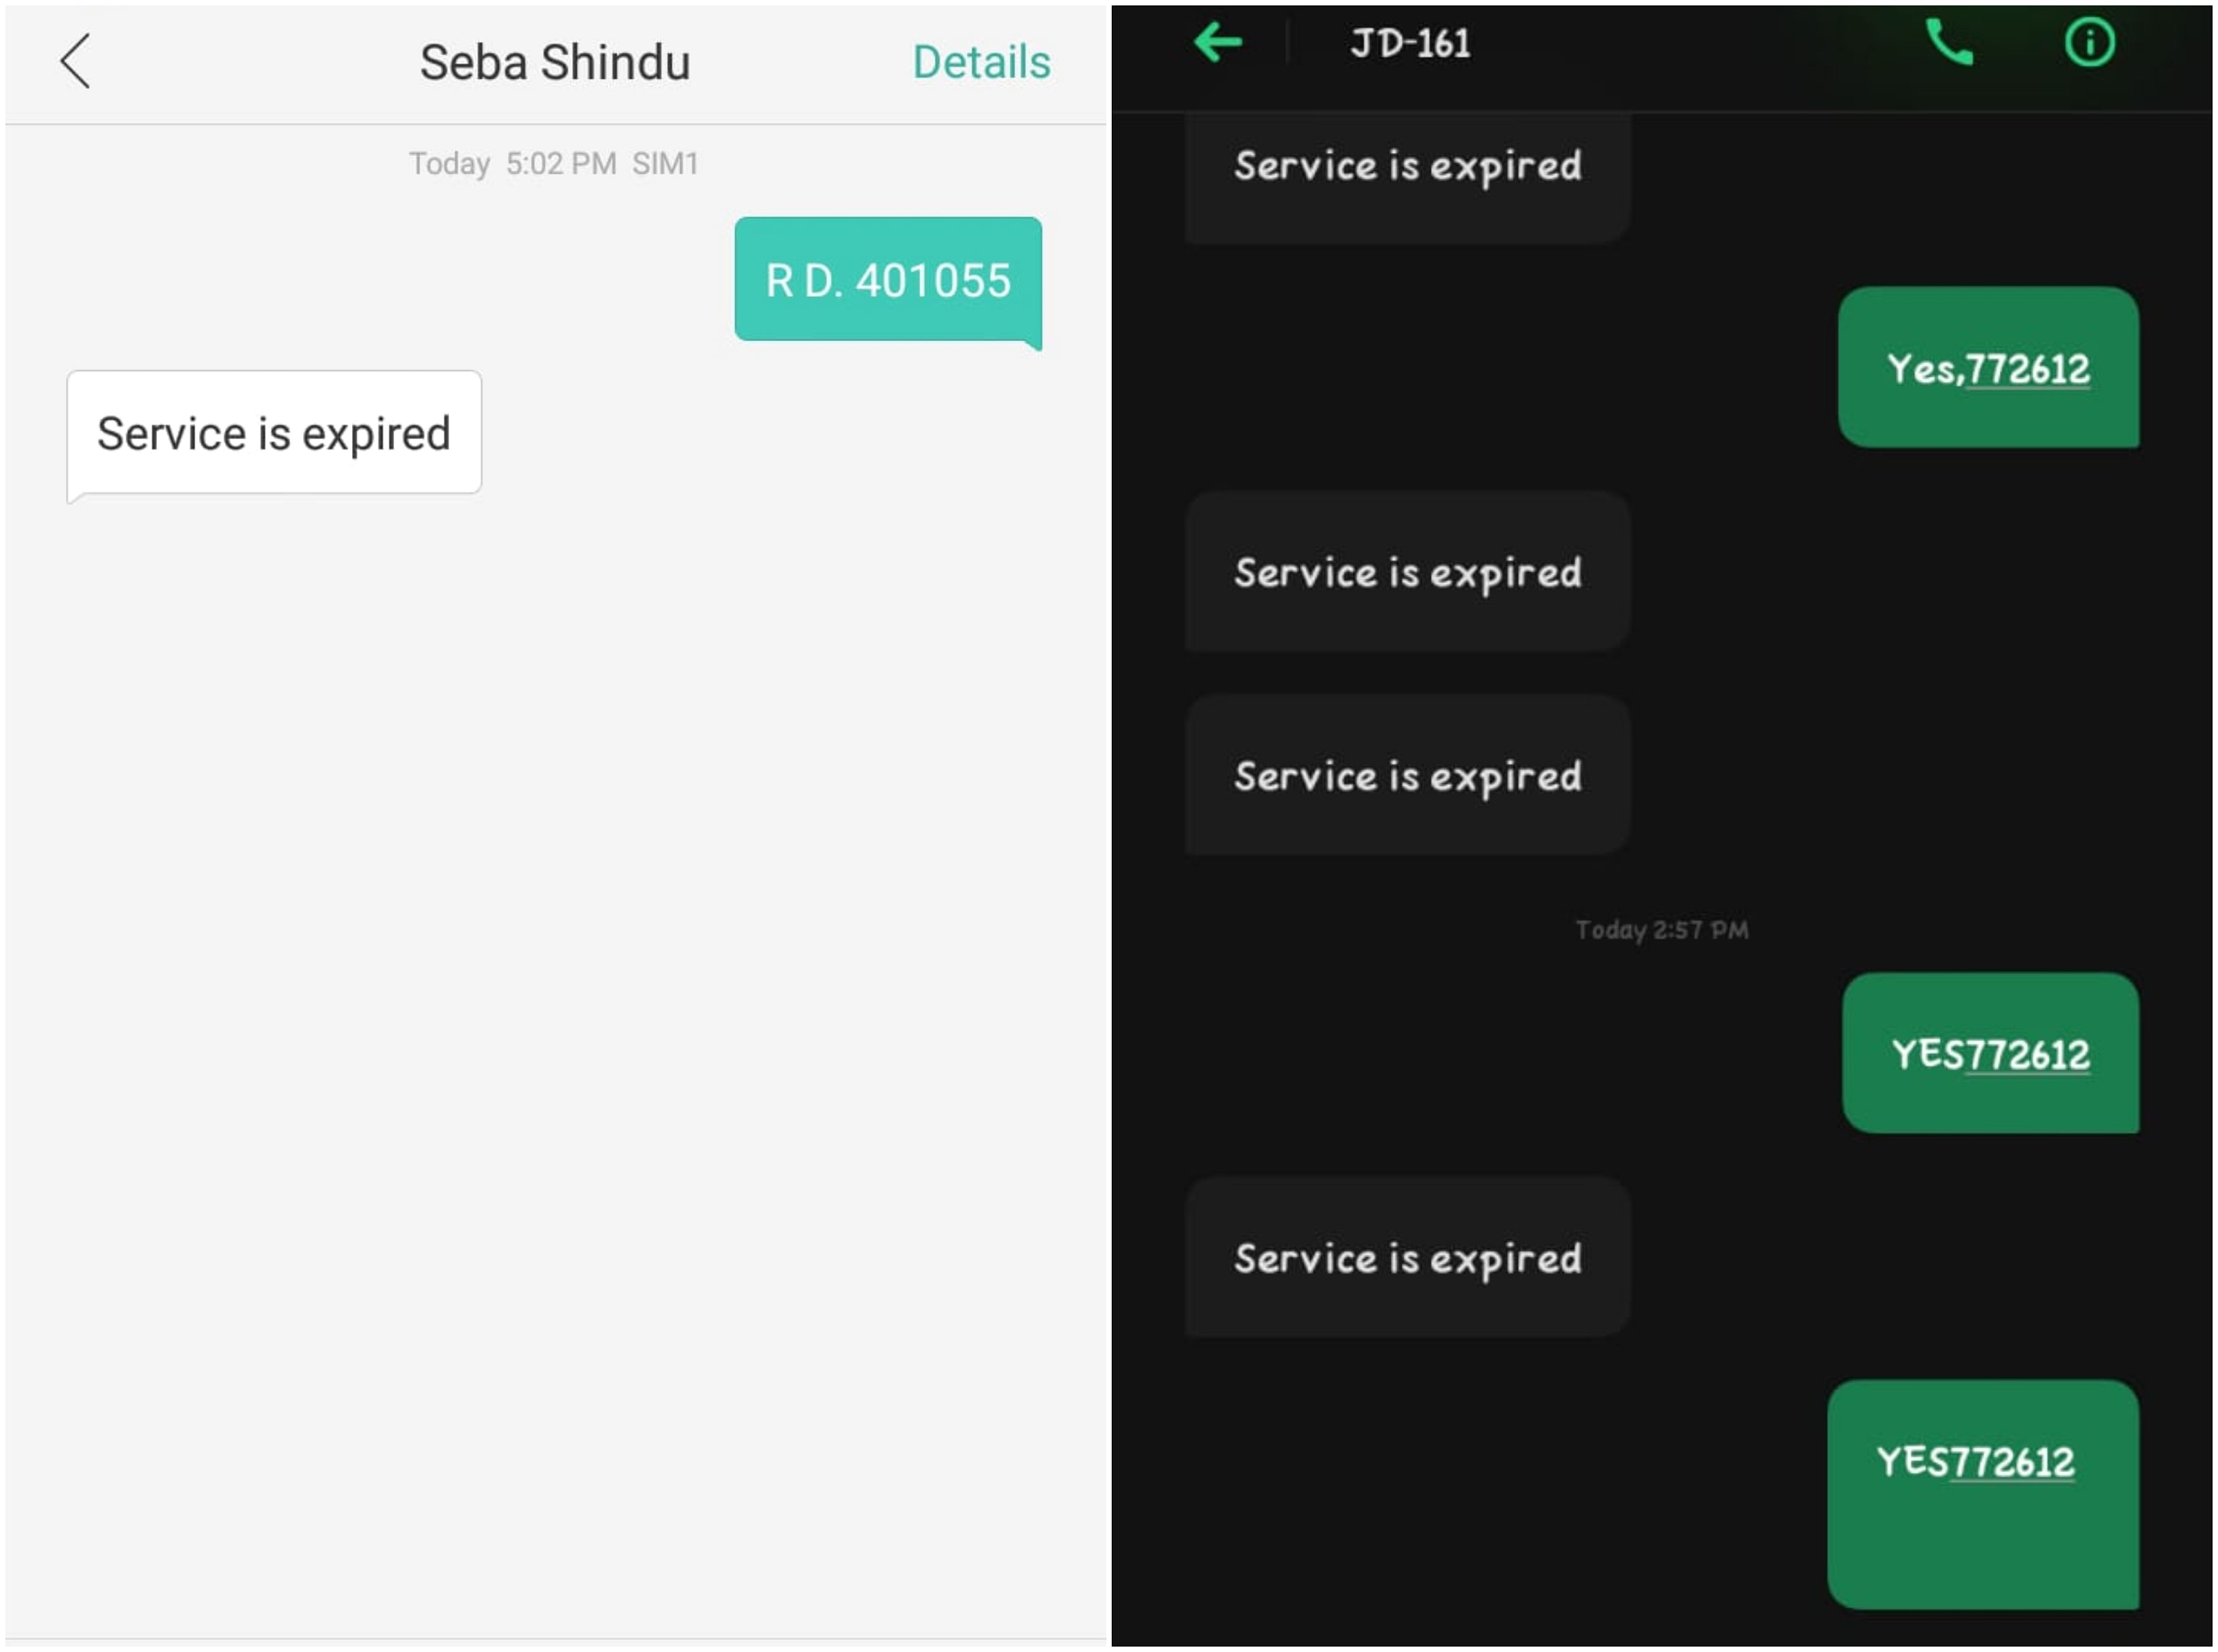 Many labourers who have registered on the Karnataka government's Seva Sindhu  portal to seek train services to travel back home are being asked to confirm their demand. However, instead of placing a call for confirmation, the government has been sending automated messages.